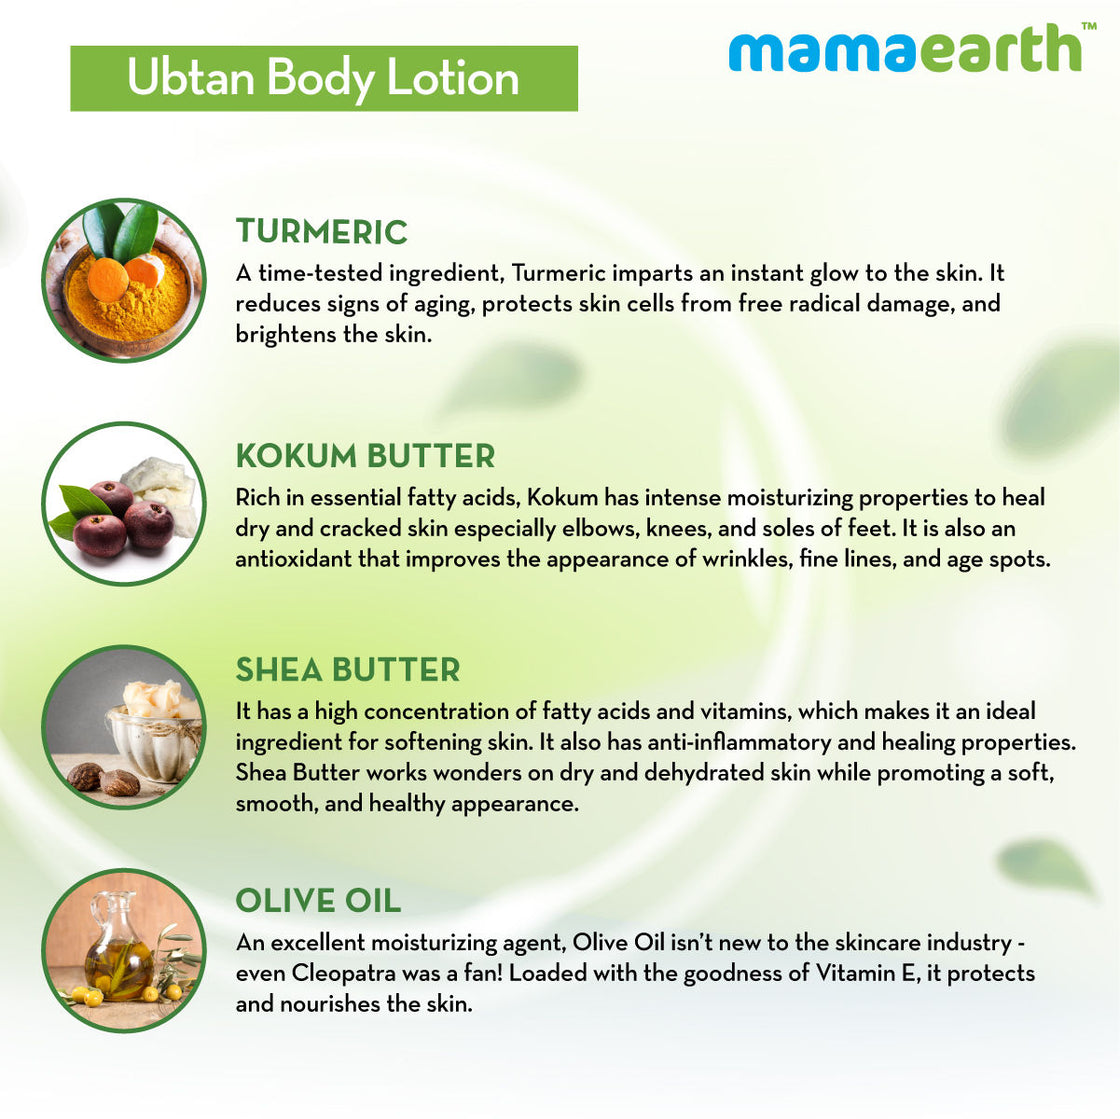 Mamaearth Ubtan Body Lotion With Turmeric & Kokum Butter For Glowing Skin-4